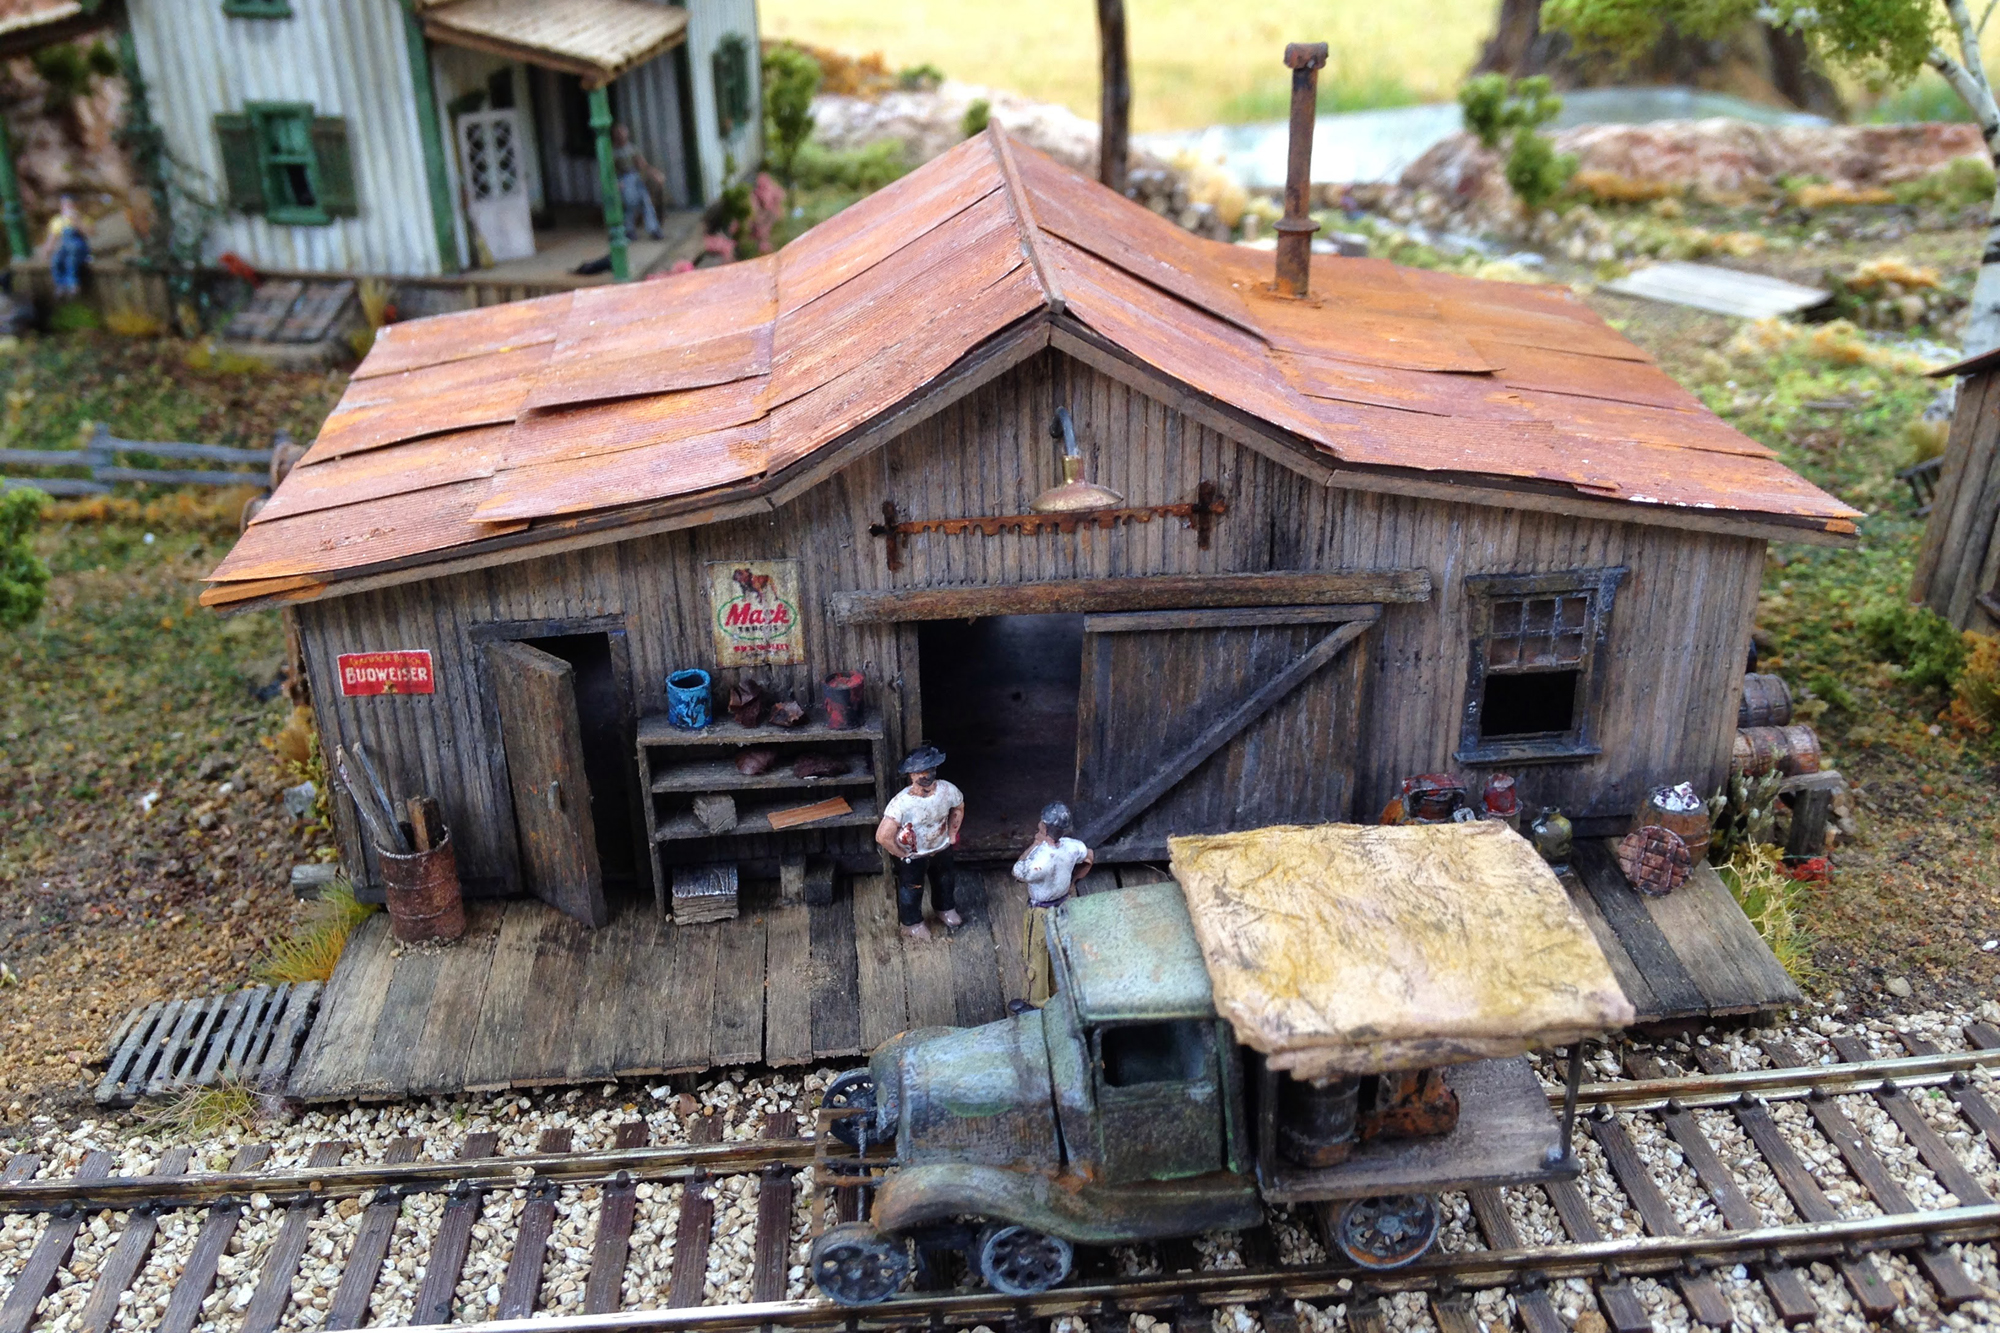 Modeling diorama by Trudy Seeley, San Diego Division member.